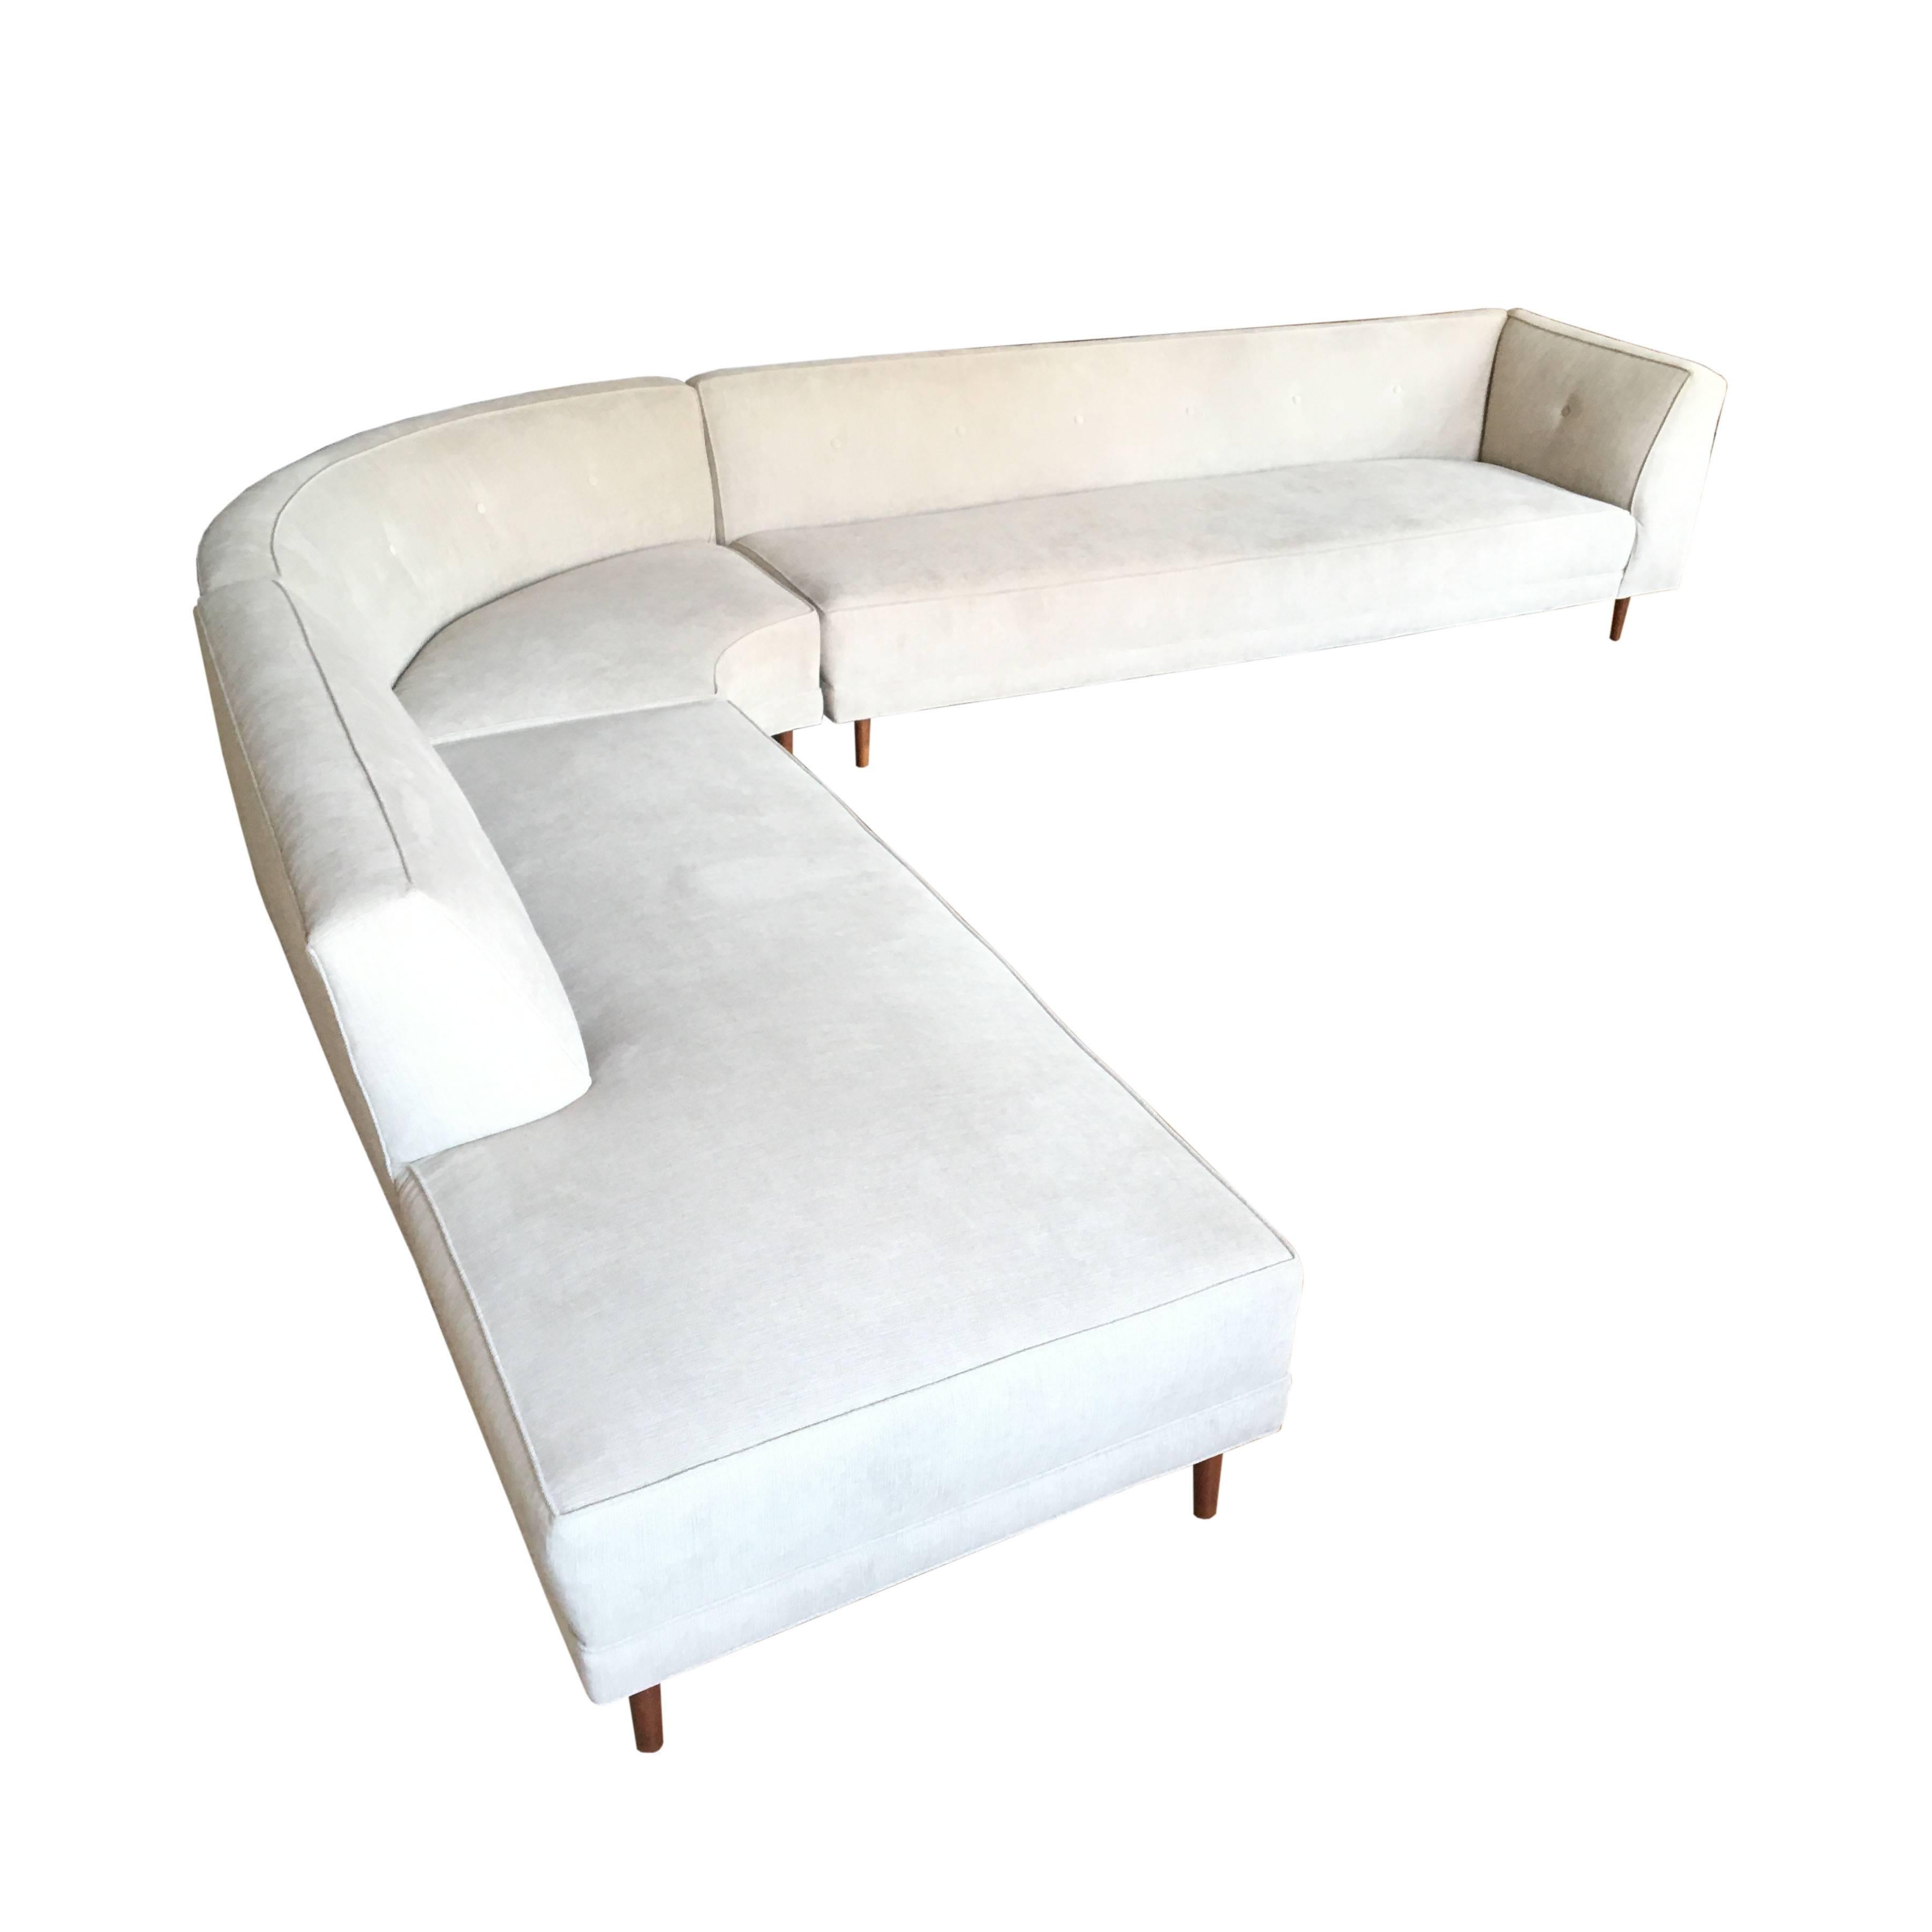 Oversized three-piece Mid-Century Modern sectional sofa. Newly reupholstered in fleck grey Crypton stain resistant fabric.
 
Measurements:
Long section: 90